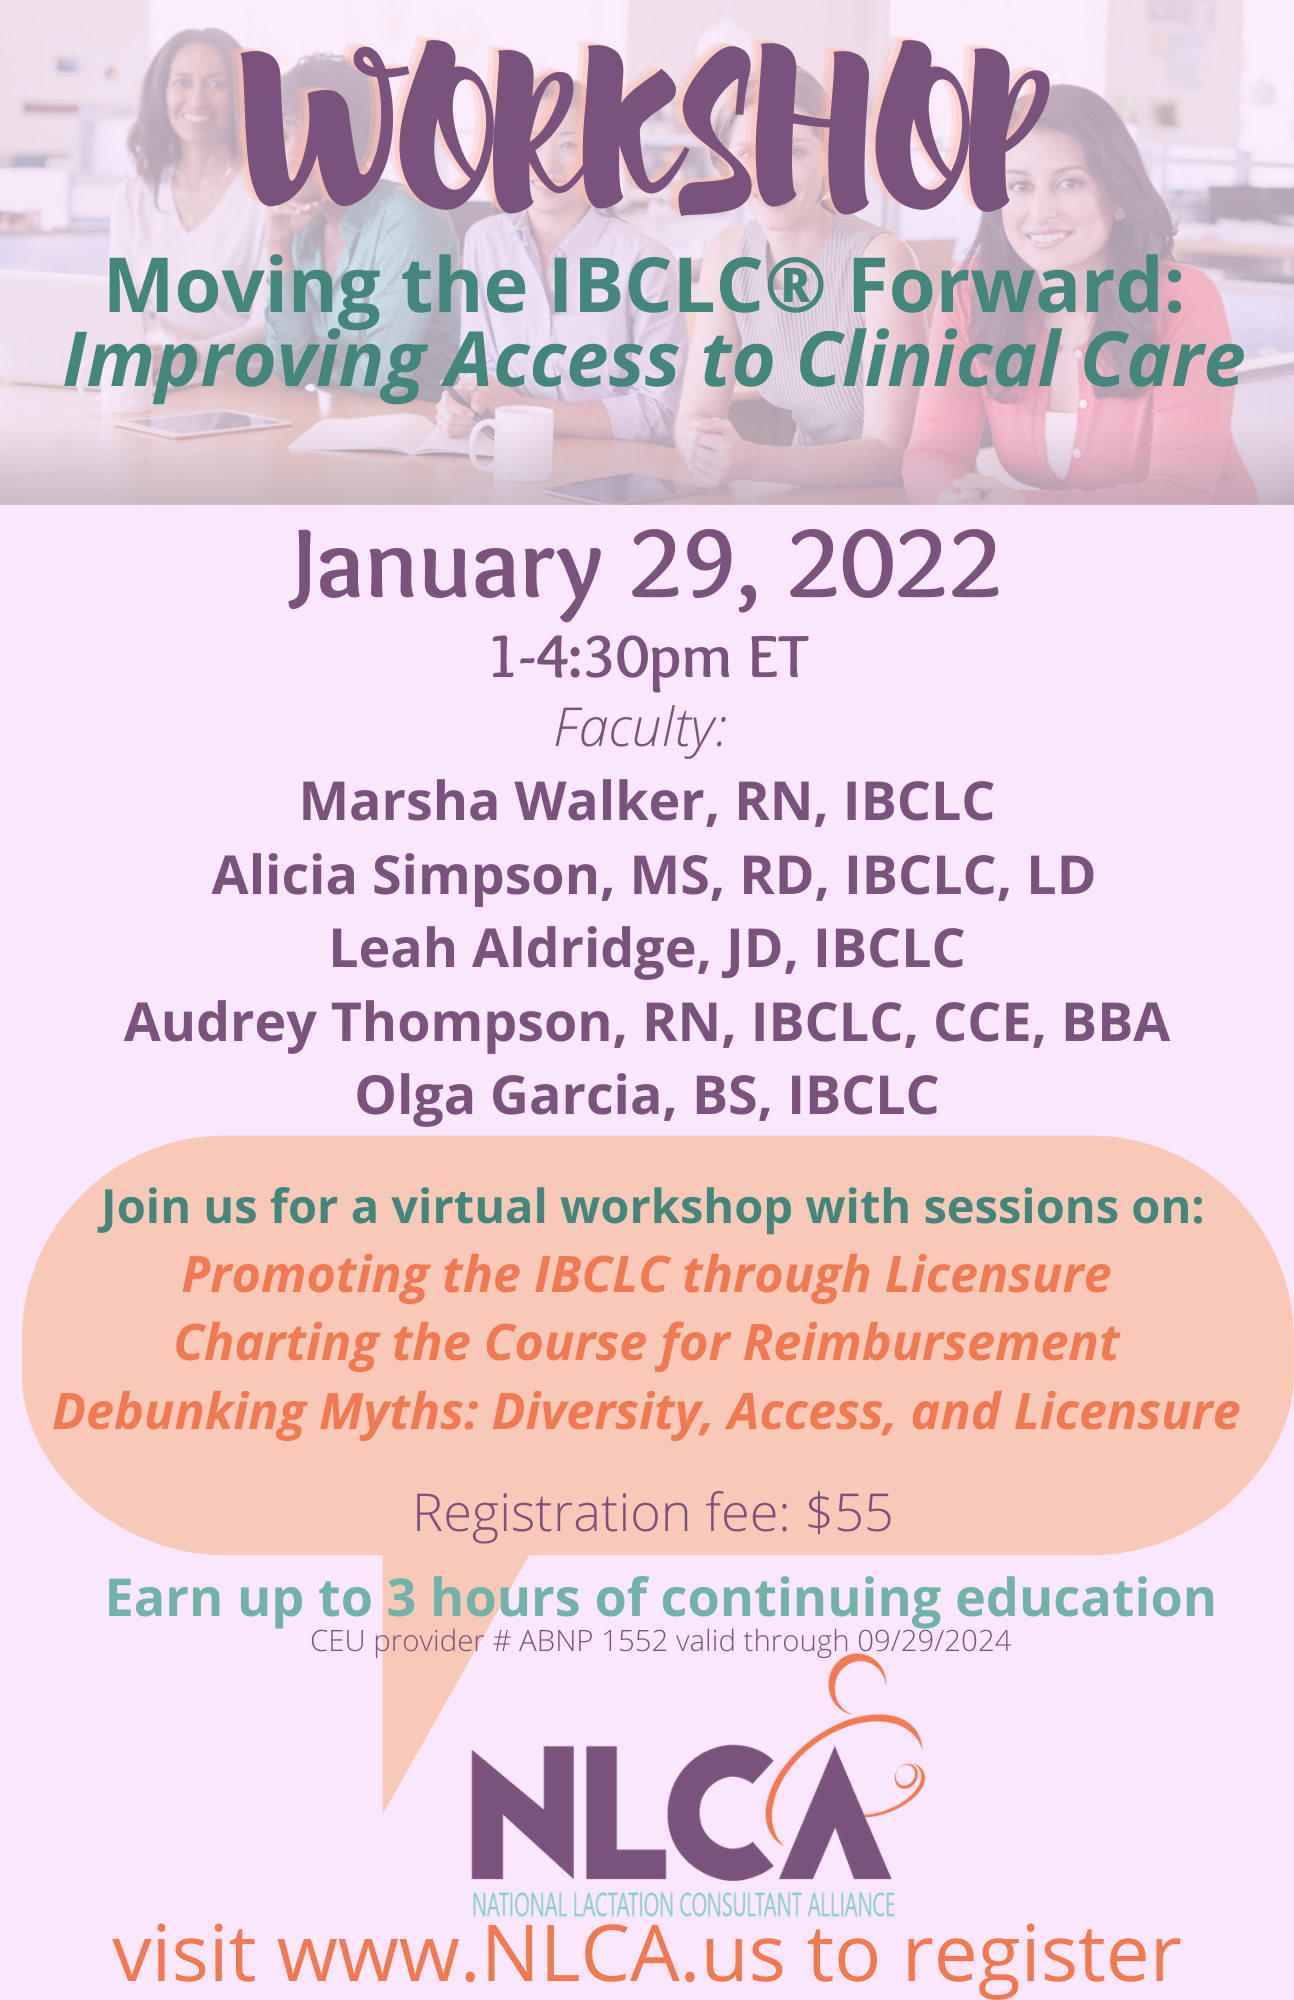 Moving the IBCLC® Forward: A Workshop on Improving Access to Clinical Care